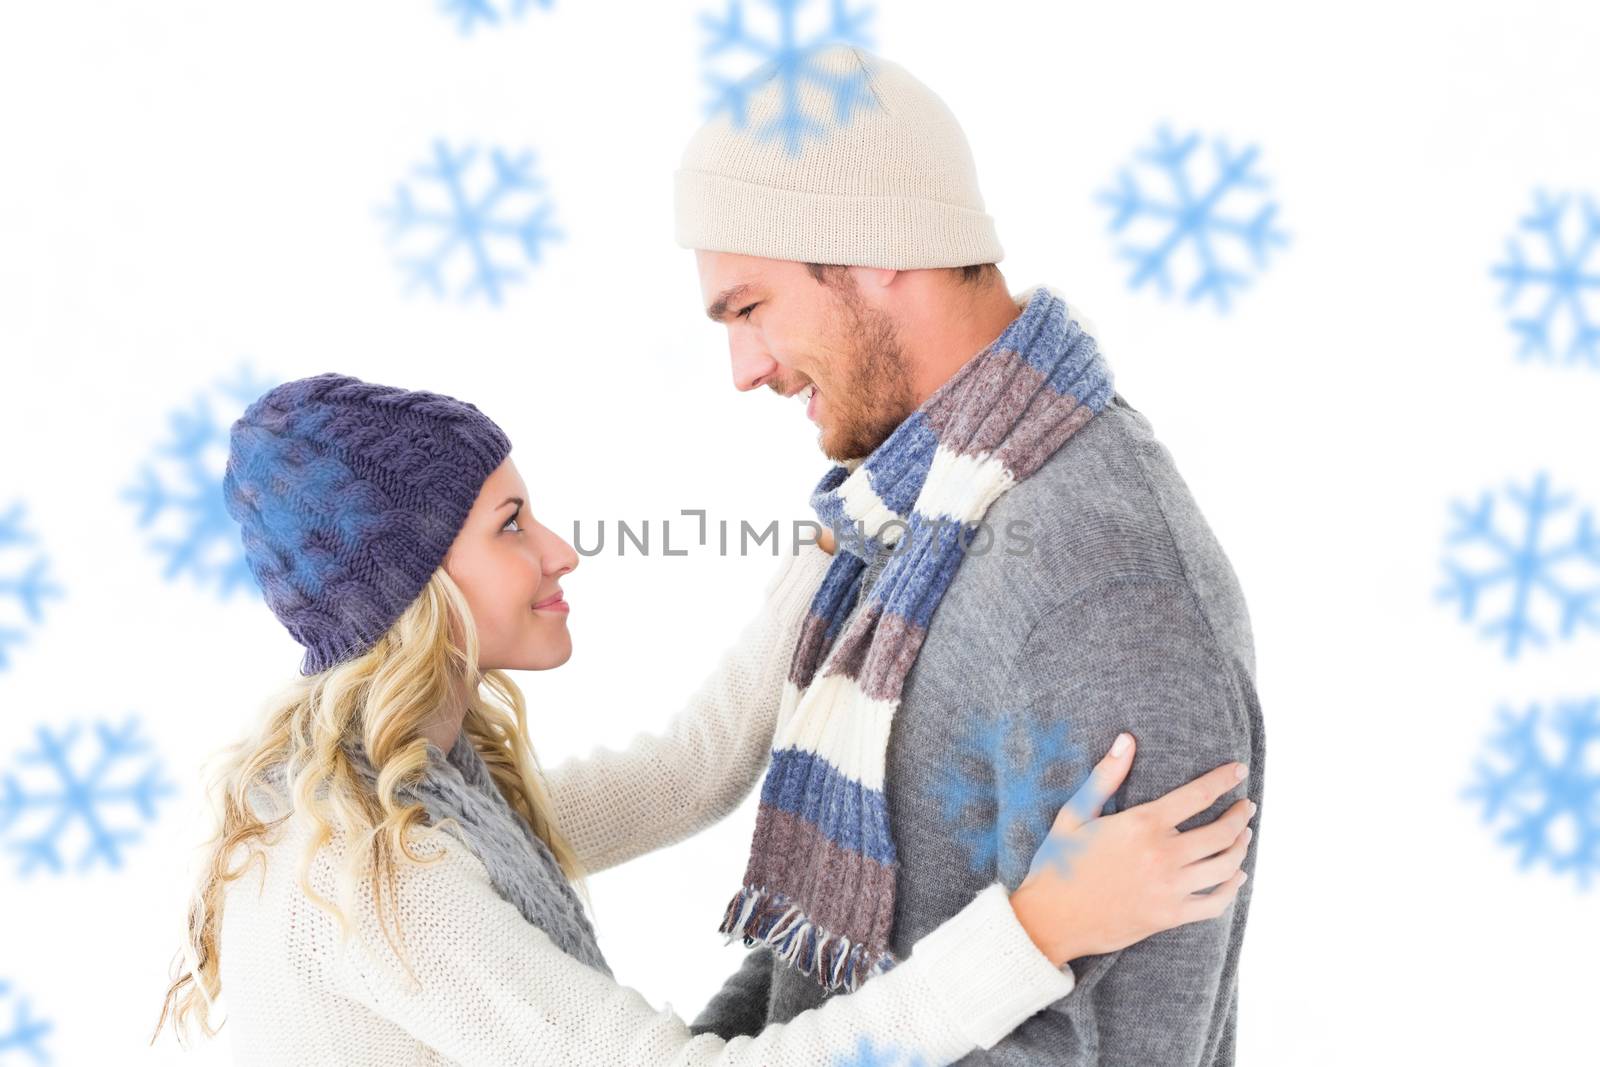 Attractive couple in winter fashion hugging against snowflakes